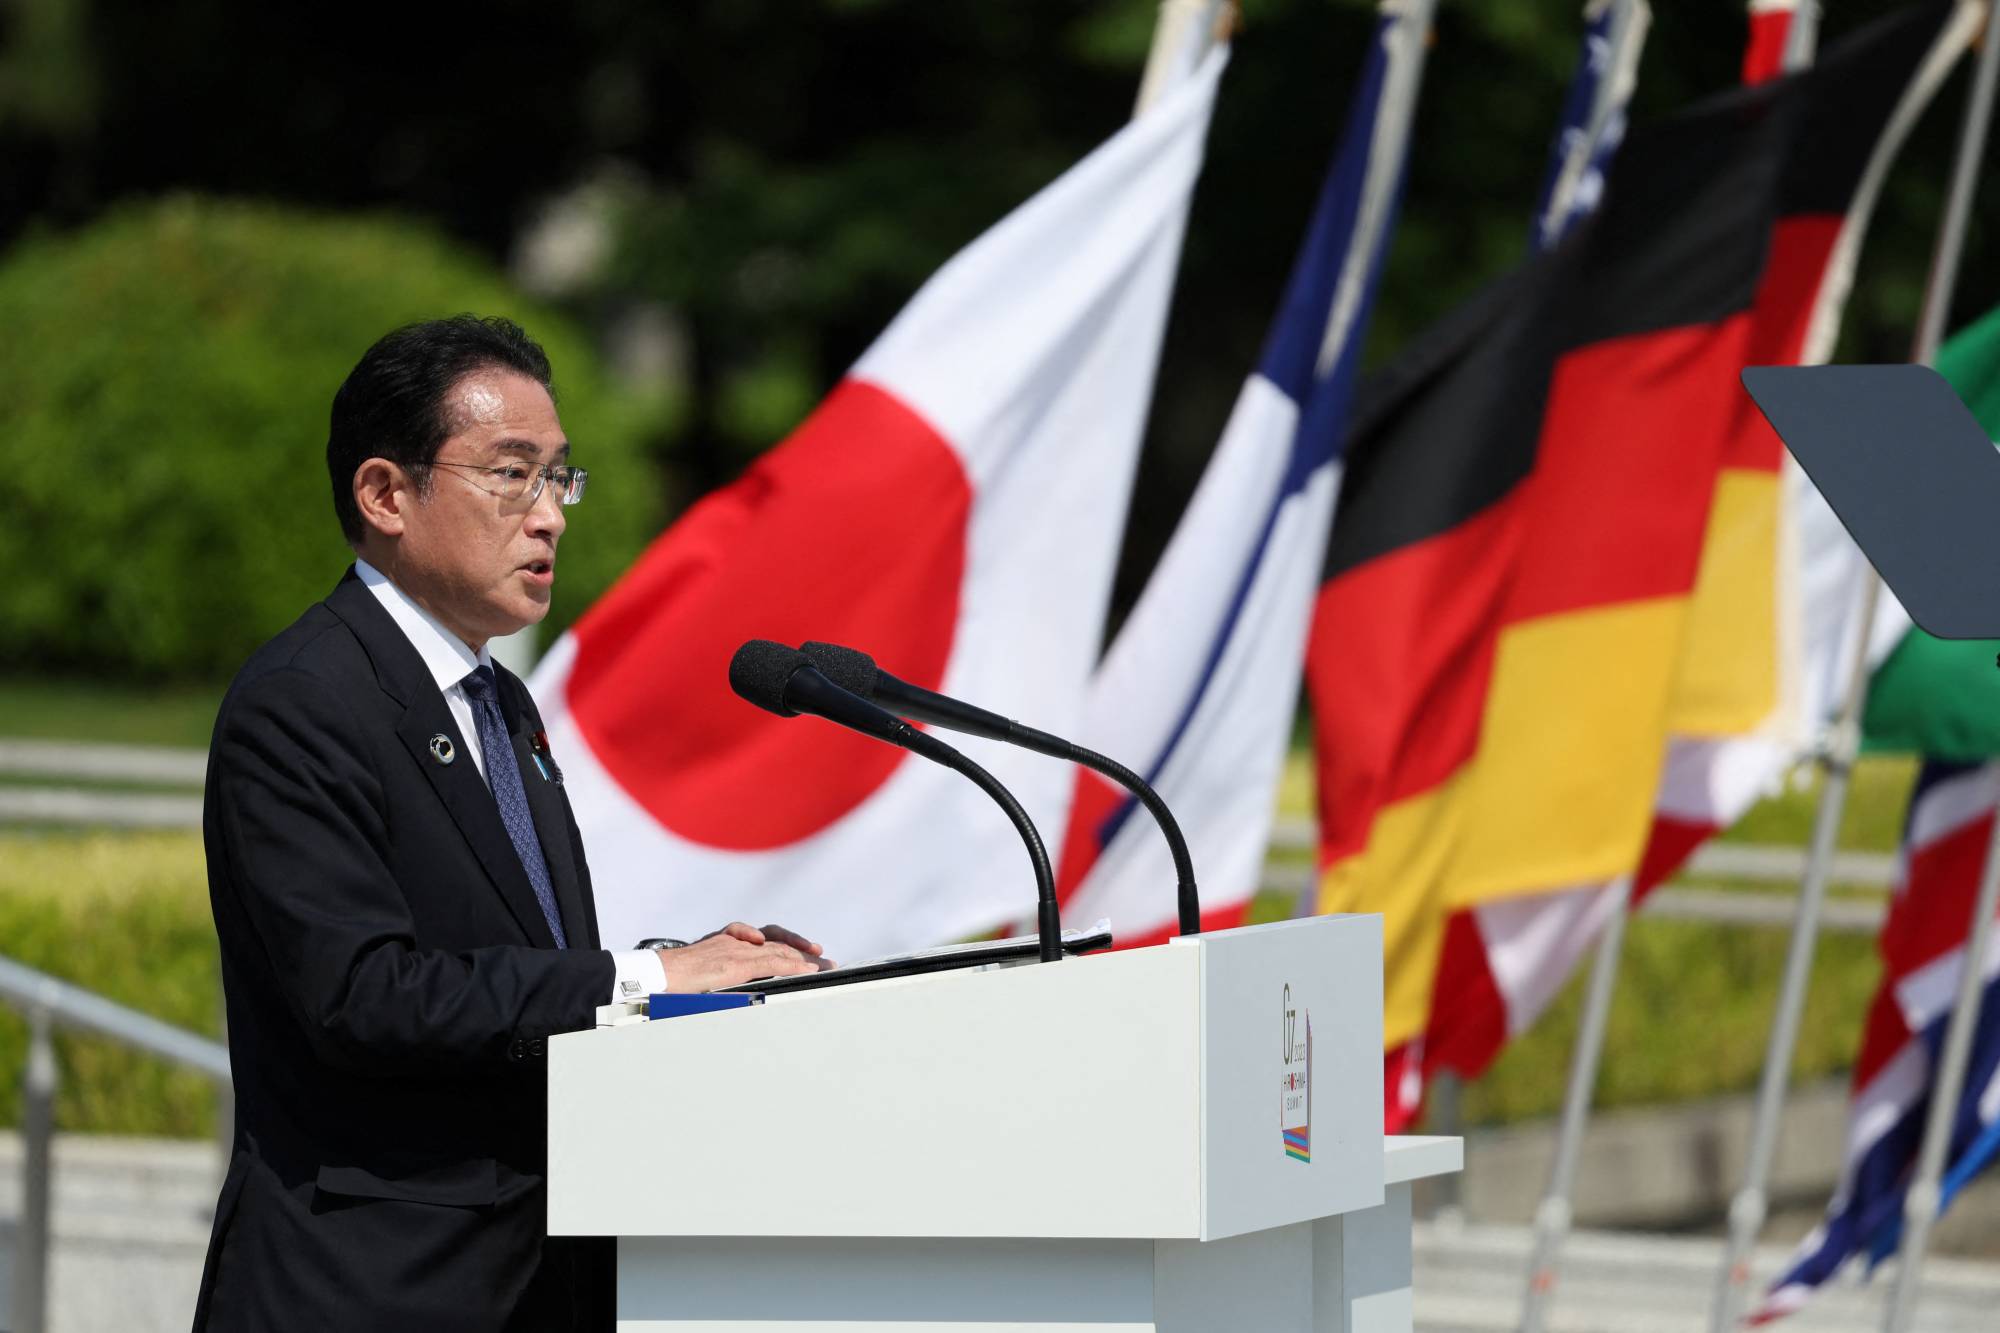 Prime Minister Fumio Kishida speaks at the Peace Memorial Park in Hiroshima on Sunday. | MINISTRY OF FOREIGN AFFAIRS OF JAPAN / VIA REUTERS